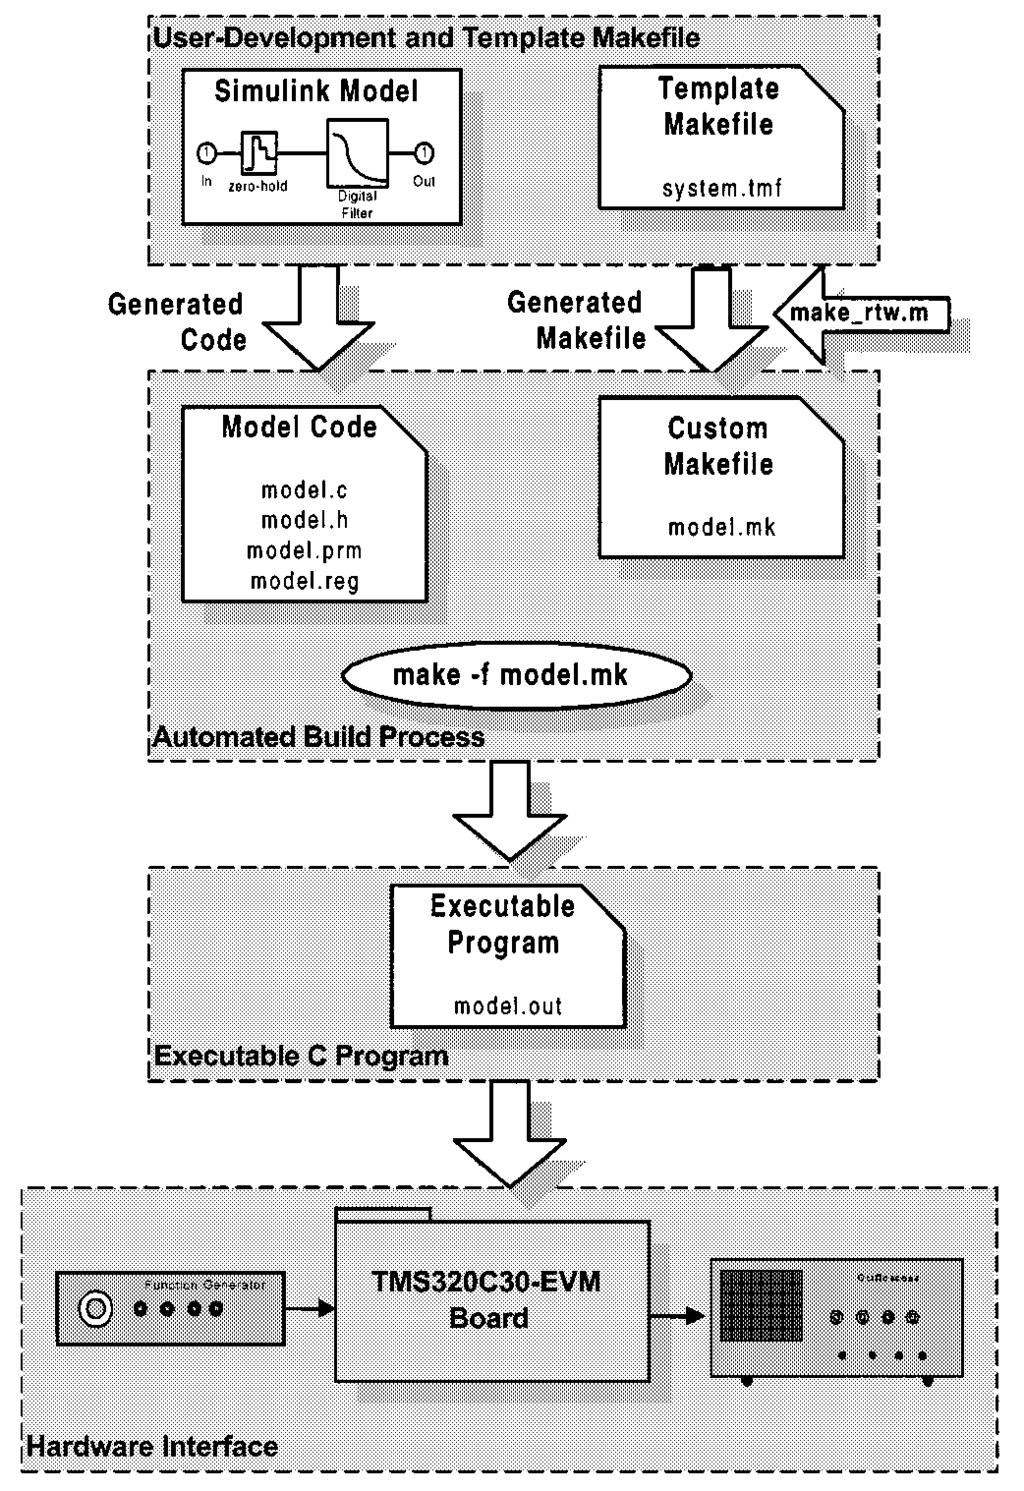 GAN et al.: RAPID PROTOTYPING SYSTEM FOR TEACHING REAL-TIME DIGITAL SIGNAL PROCESSING 21 Fig. 4. Make utility flow diagram. Fig. 3. The automatic build process for a real-time system.